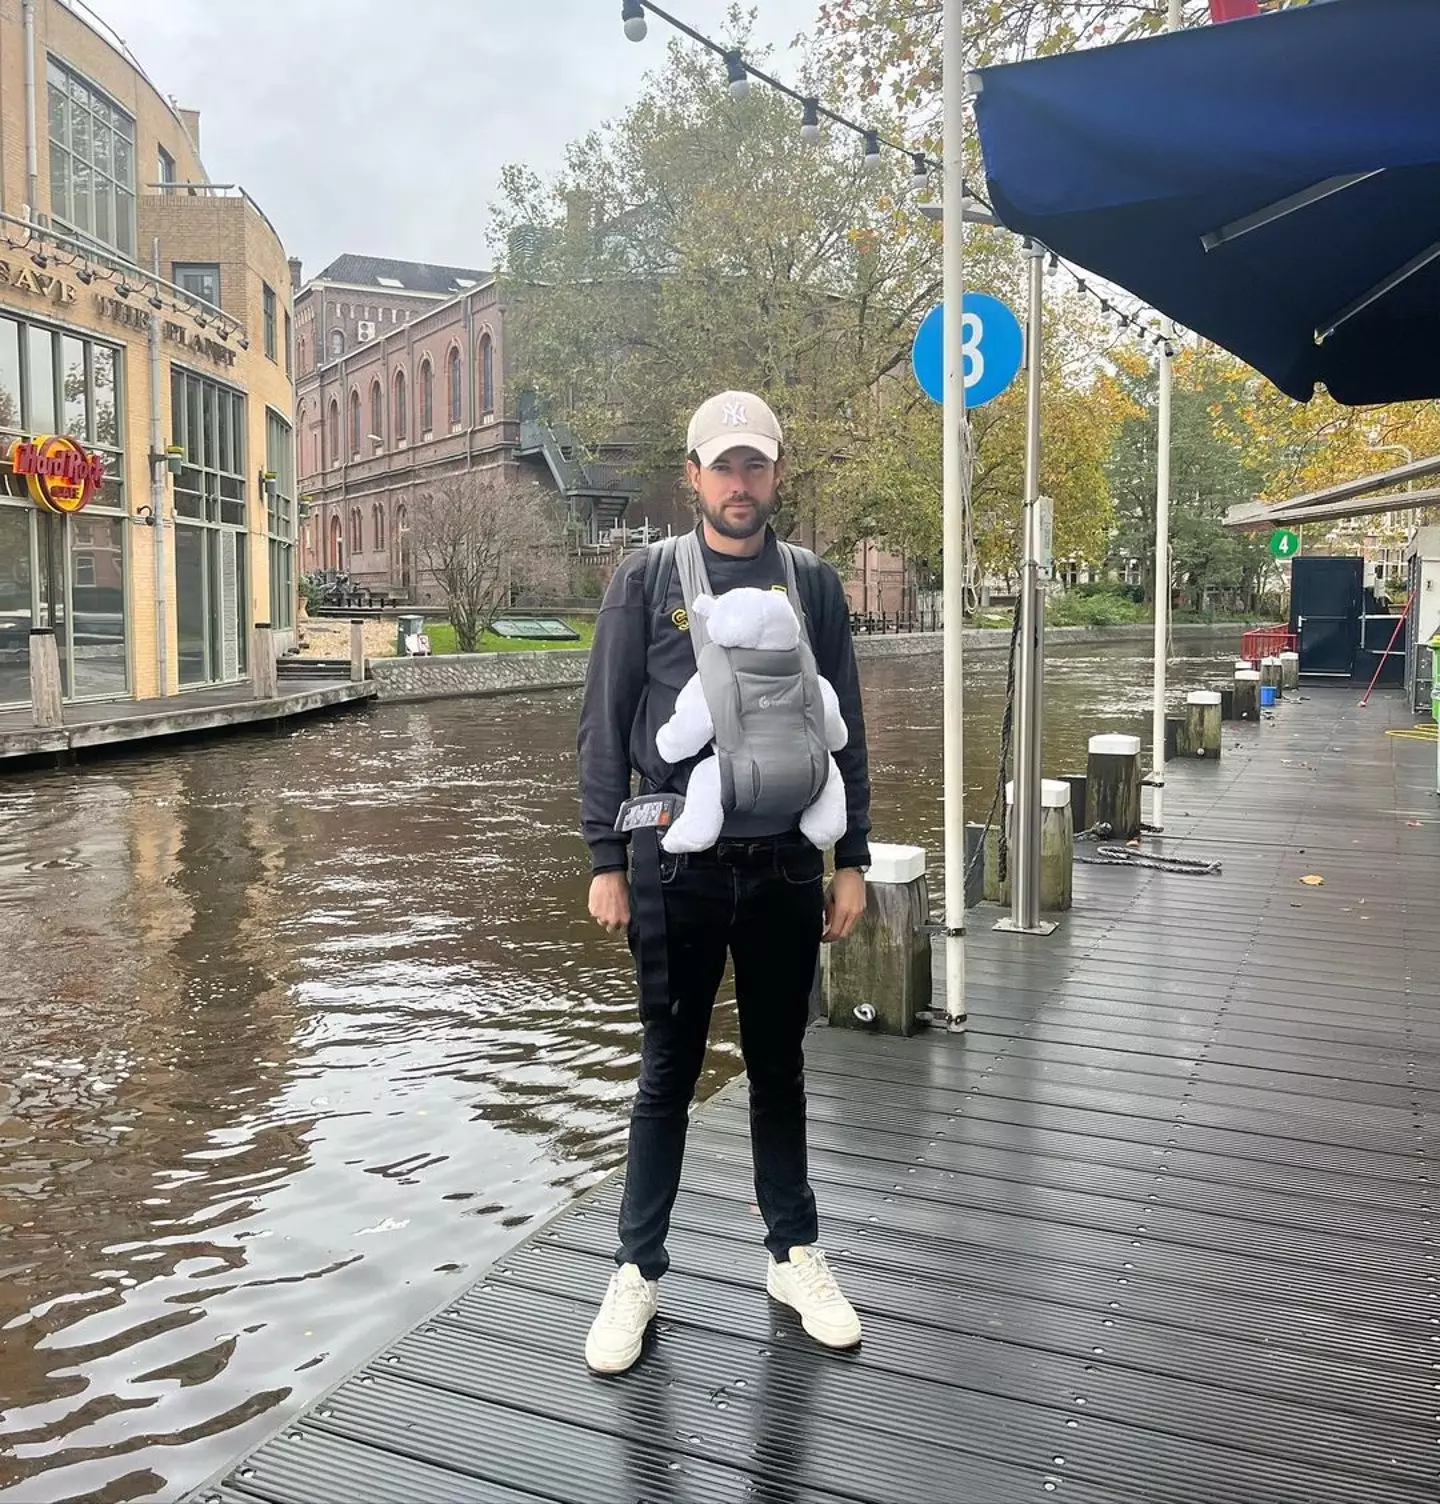 Amsterdam is a different experience for Jack nowadays.